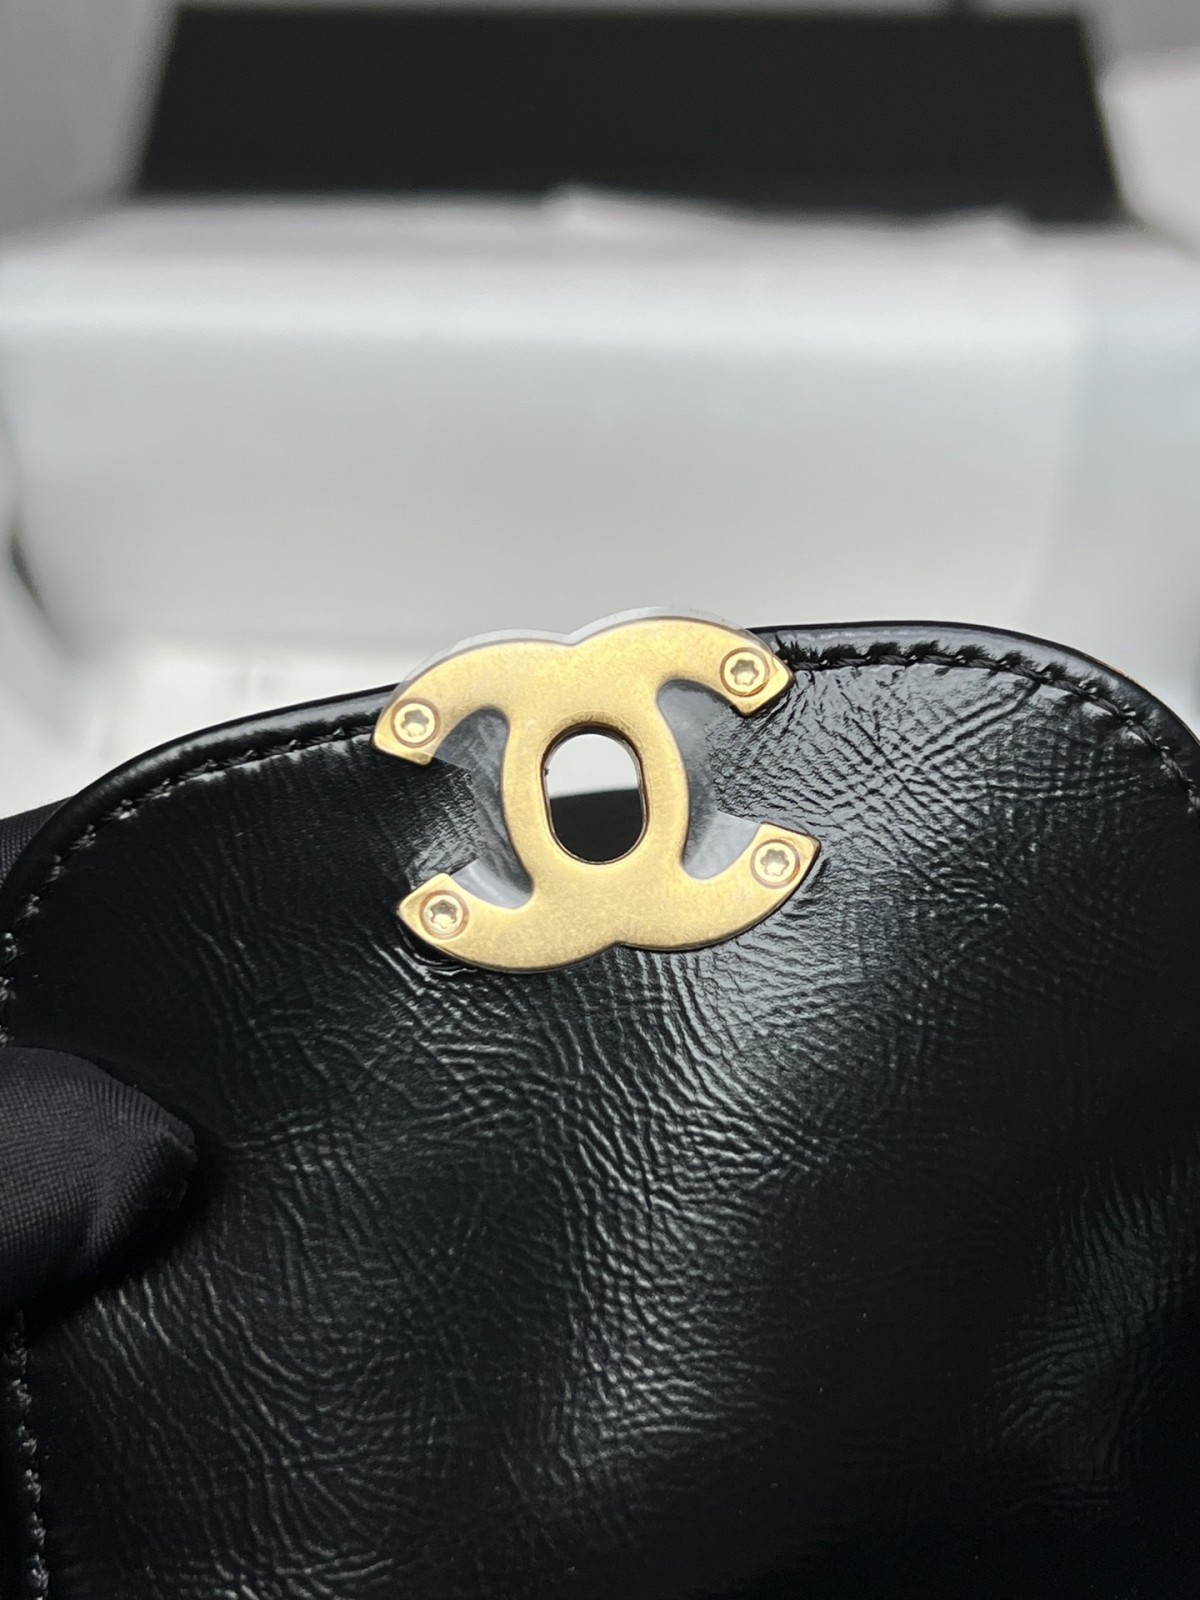 I heard you are looking for Best replica Chanel 23K Kelly bag (2023 Week 52)-Best Quality Fake Louis Vuitton Bag Online Store, Replica designer bag ru